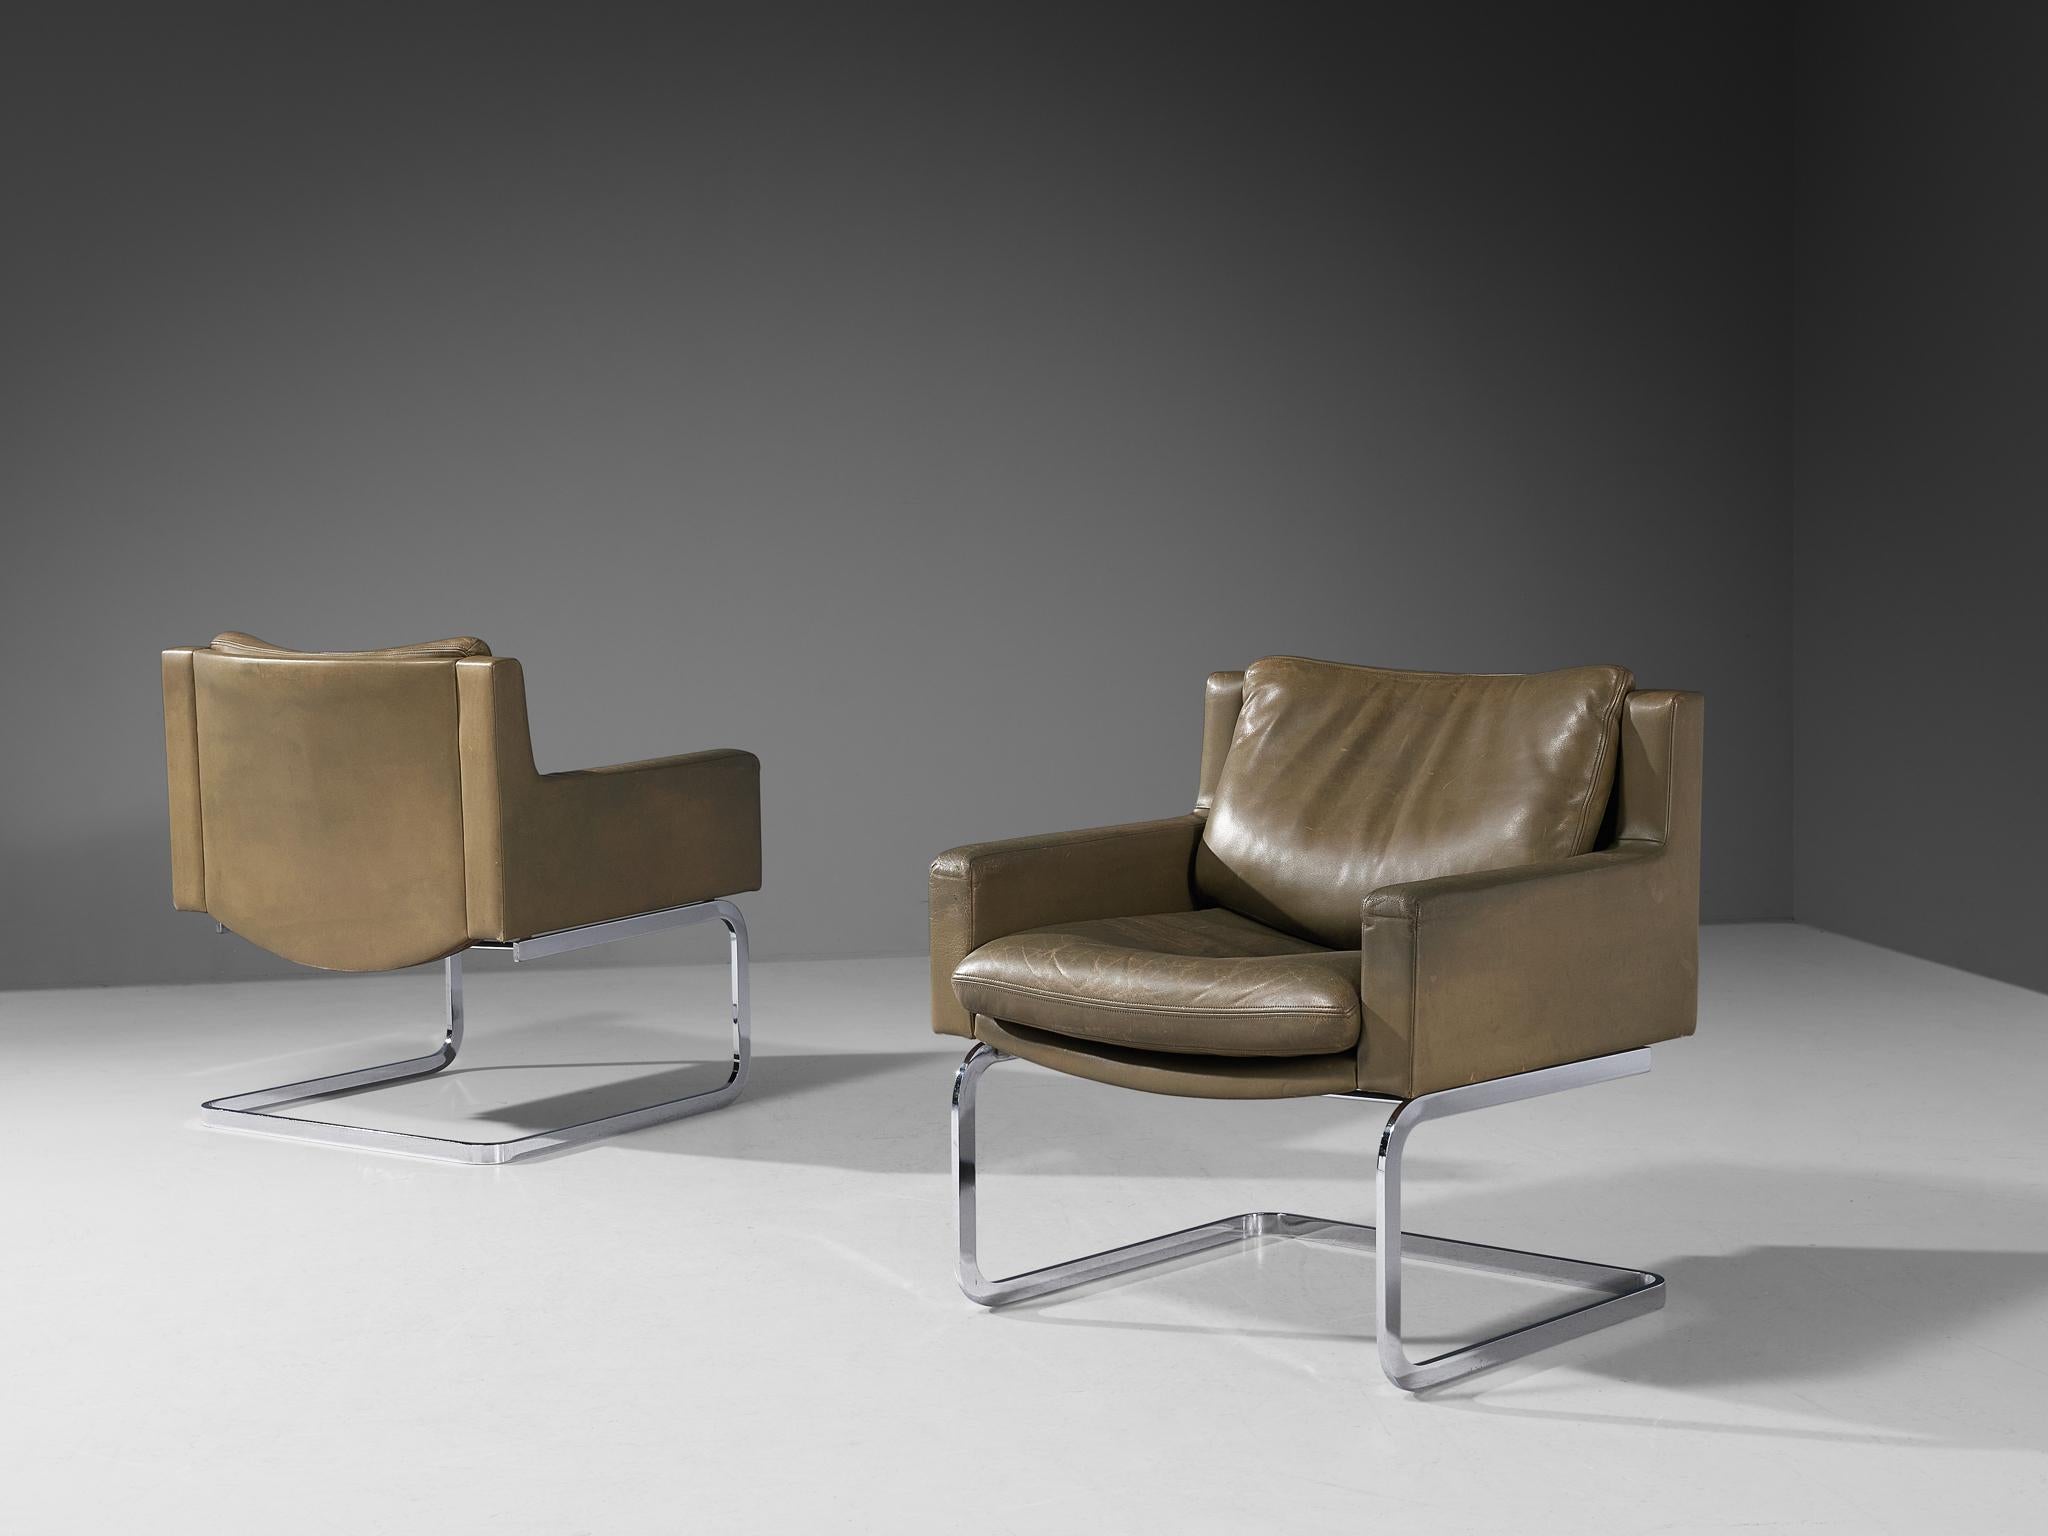 Robert Haussmann for De Sede, pair of armchairs model 'DS-201', chrome-plated metal, leather, Switzerland, designed in 1957 

A design by Robert Haussmann that features a cubic shaped structure. The backrest runs into the armrests by means of a